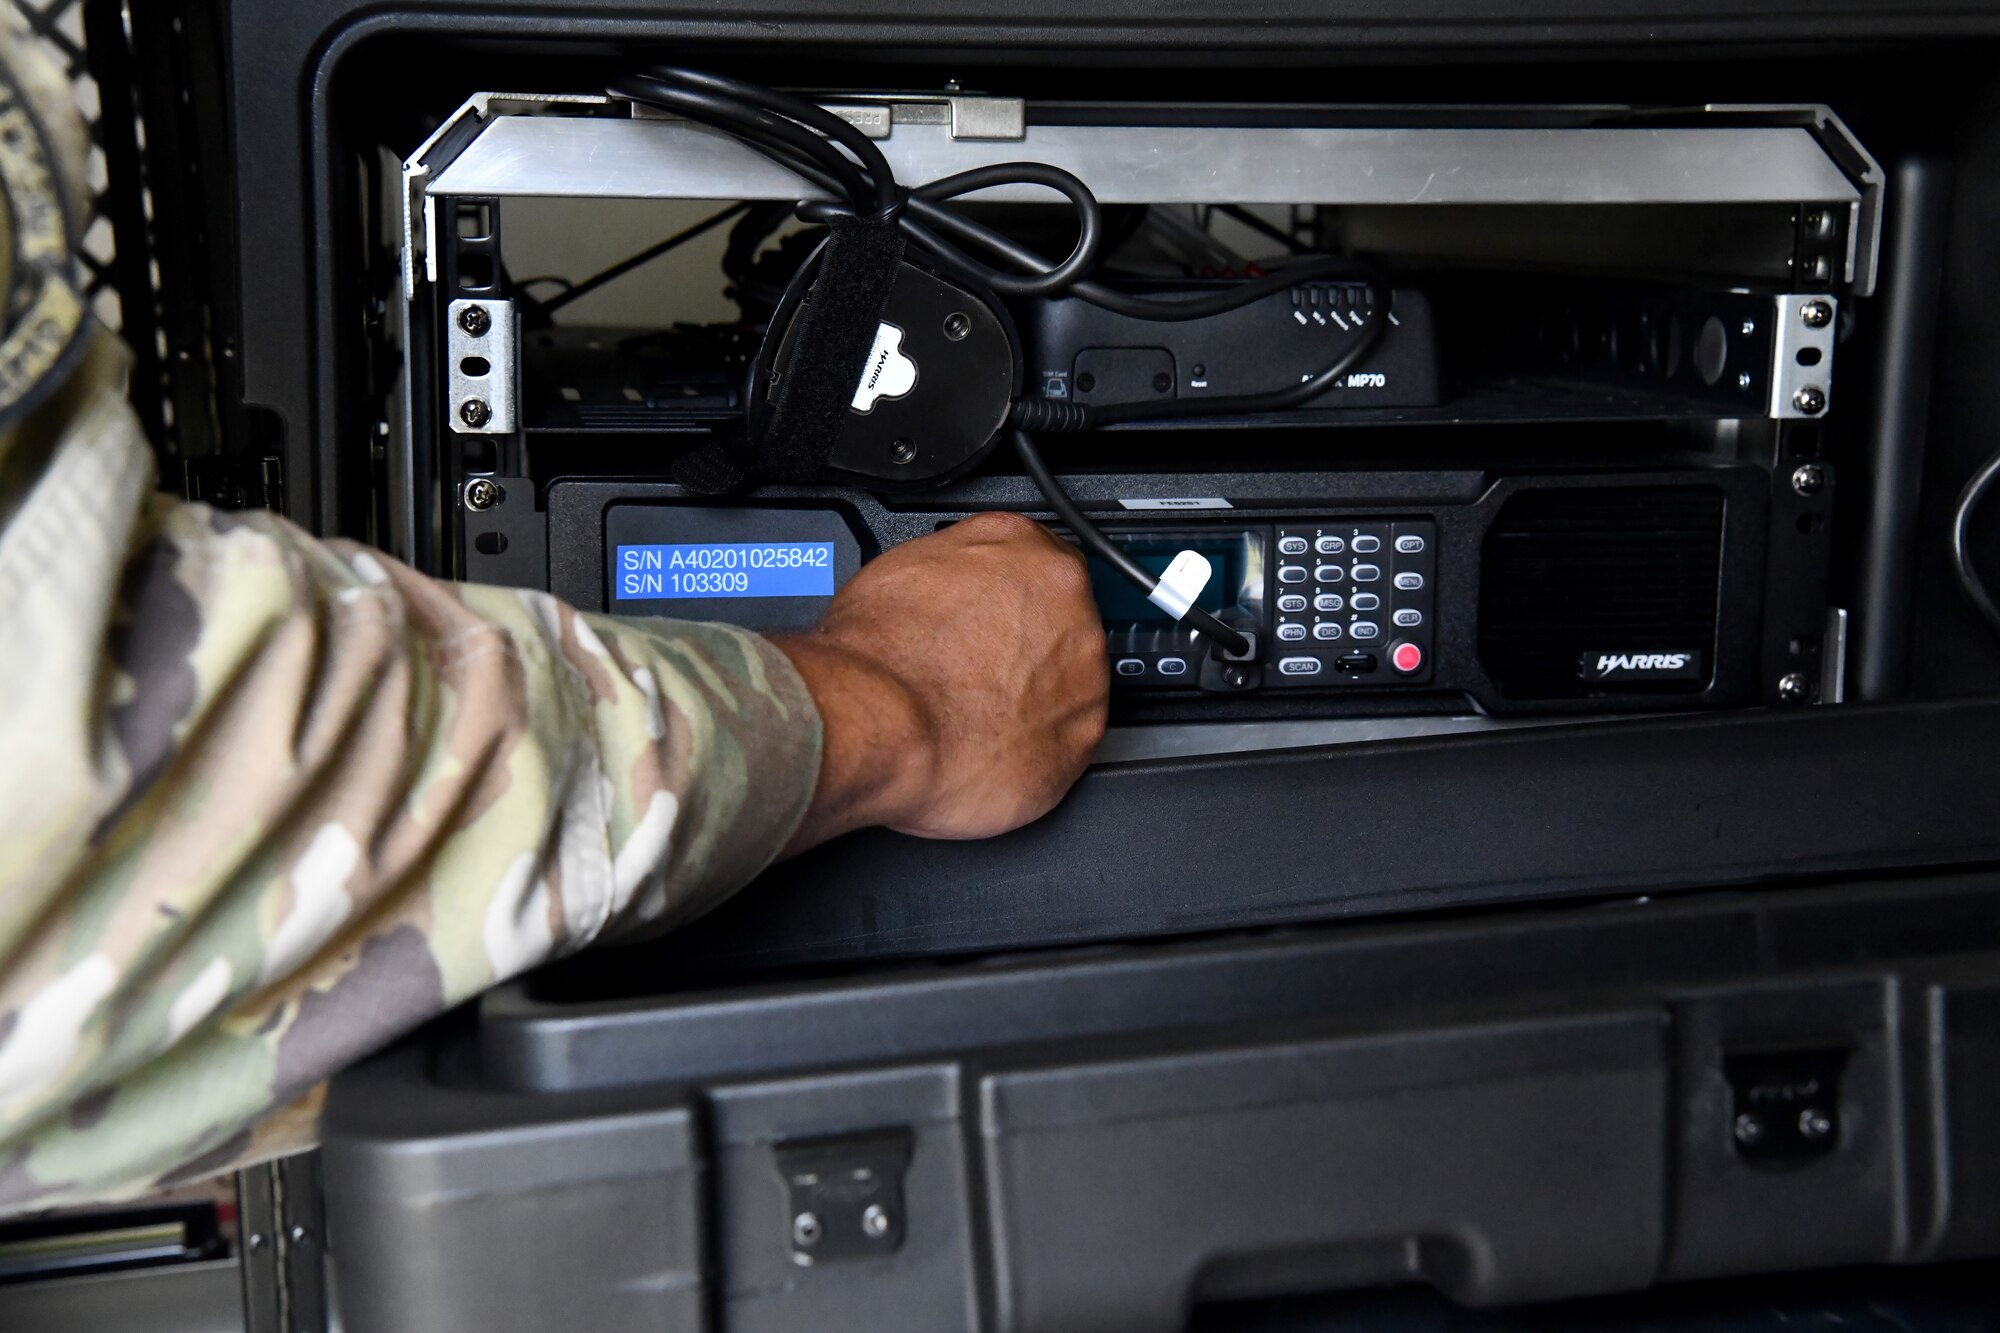 Master Sgt. Wayne Wilson, 104th Security Forces Squadron member adjusts the radio inside of a domestic operations trailer on July 27, 2021 at Barnes Air National Guard Base. The built-in radio system allows for communication between SFS members and with civilian law enforcement agencies. (U.S. Air National Guard Photo by Senior Airman Camille Lienau)